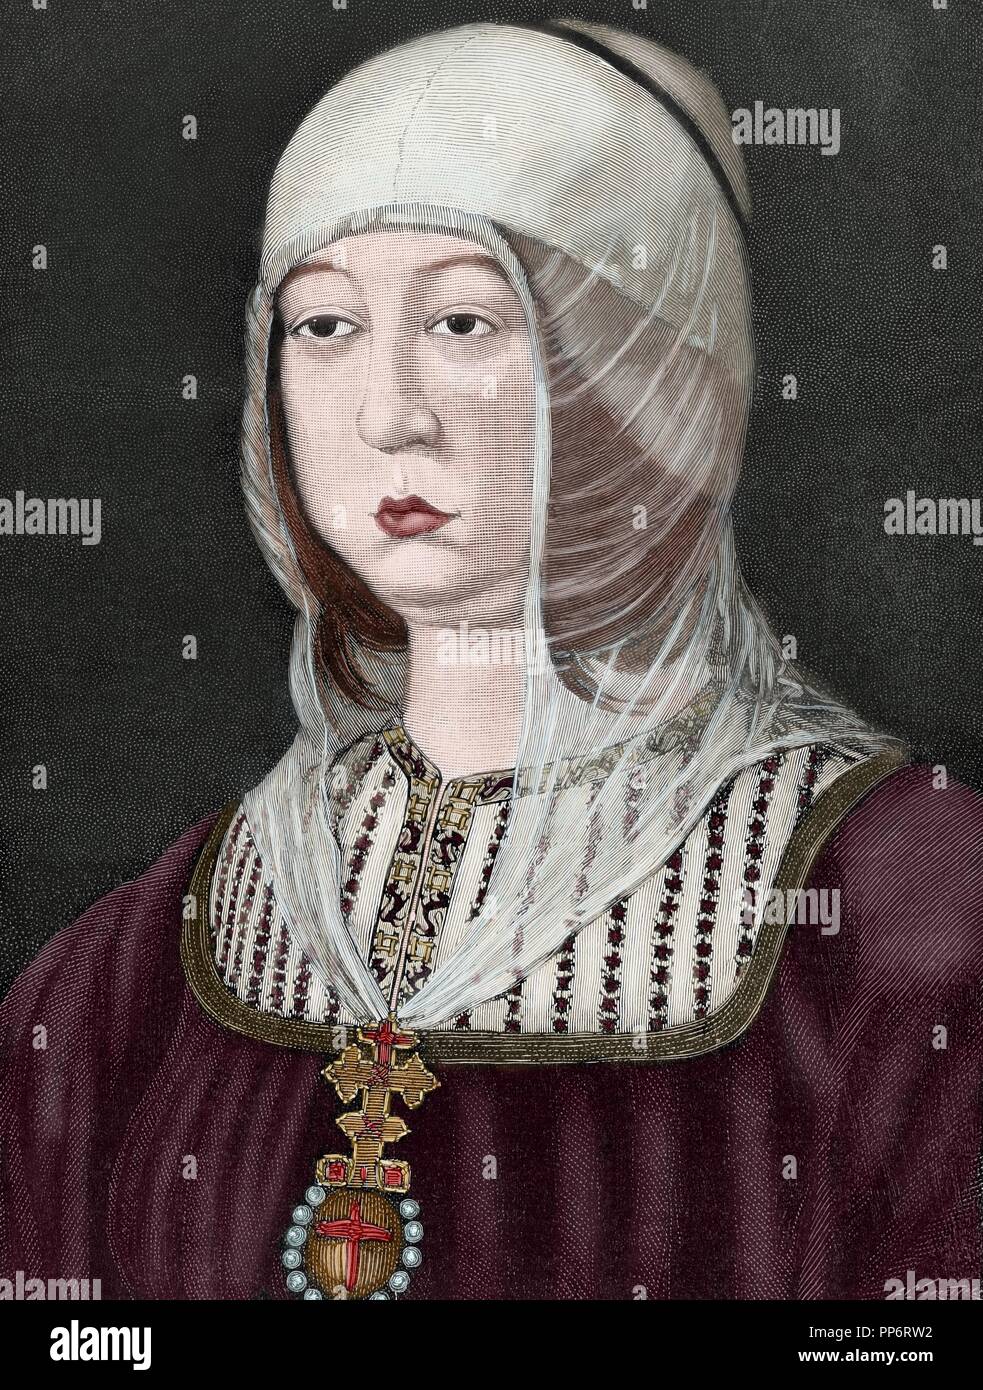 Isabella I of Castile (1451-1504). Queen of Castile. Engraving by Arturo Carretero in The Spanish and American Illustration, 1886. Colored. Stock Photo